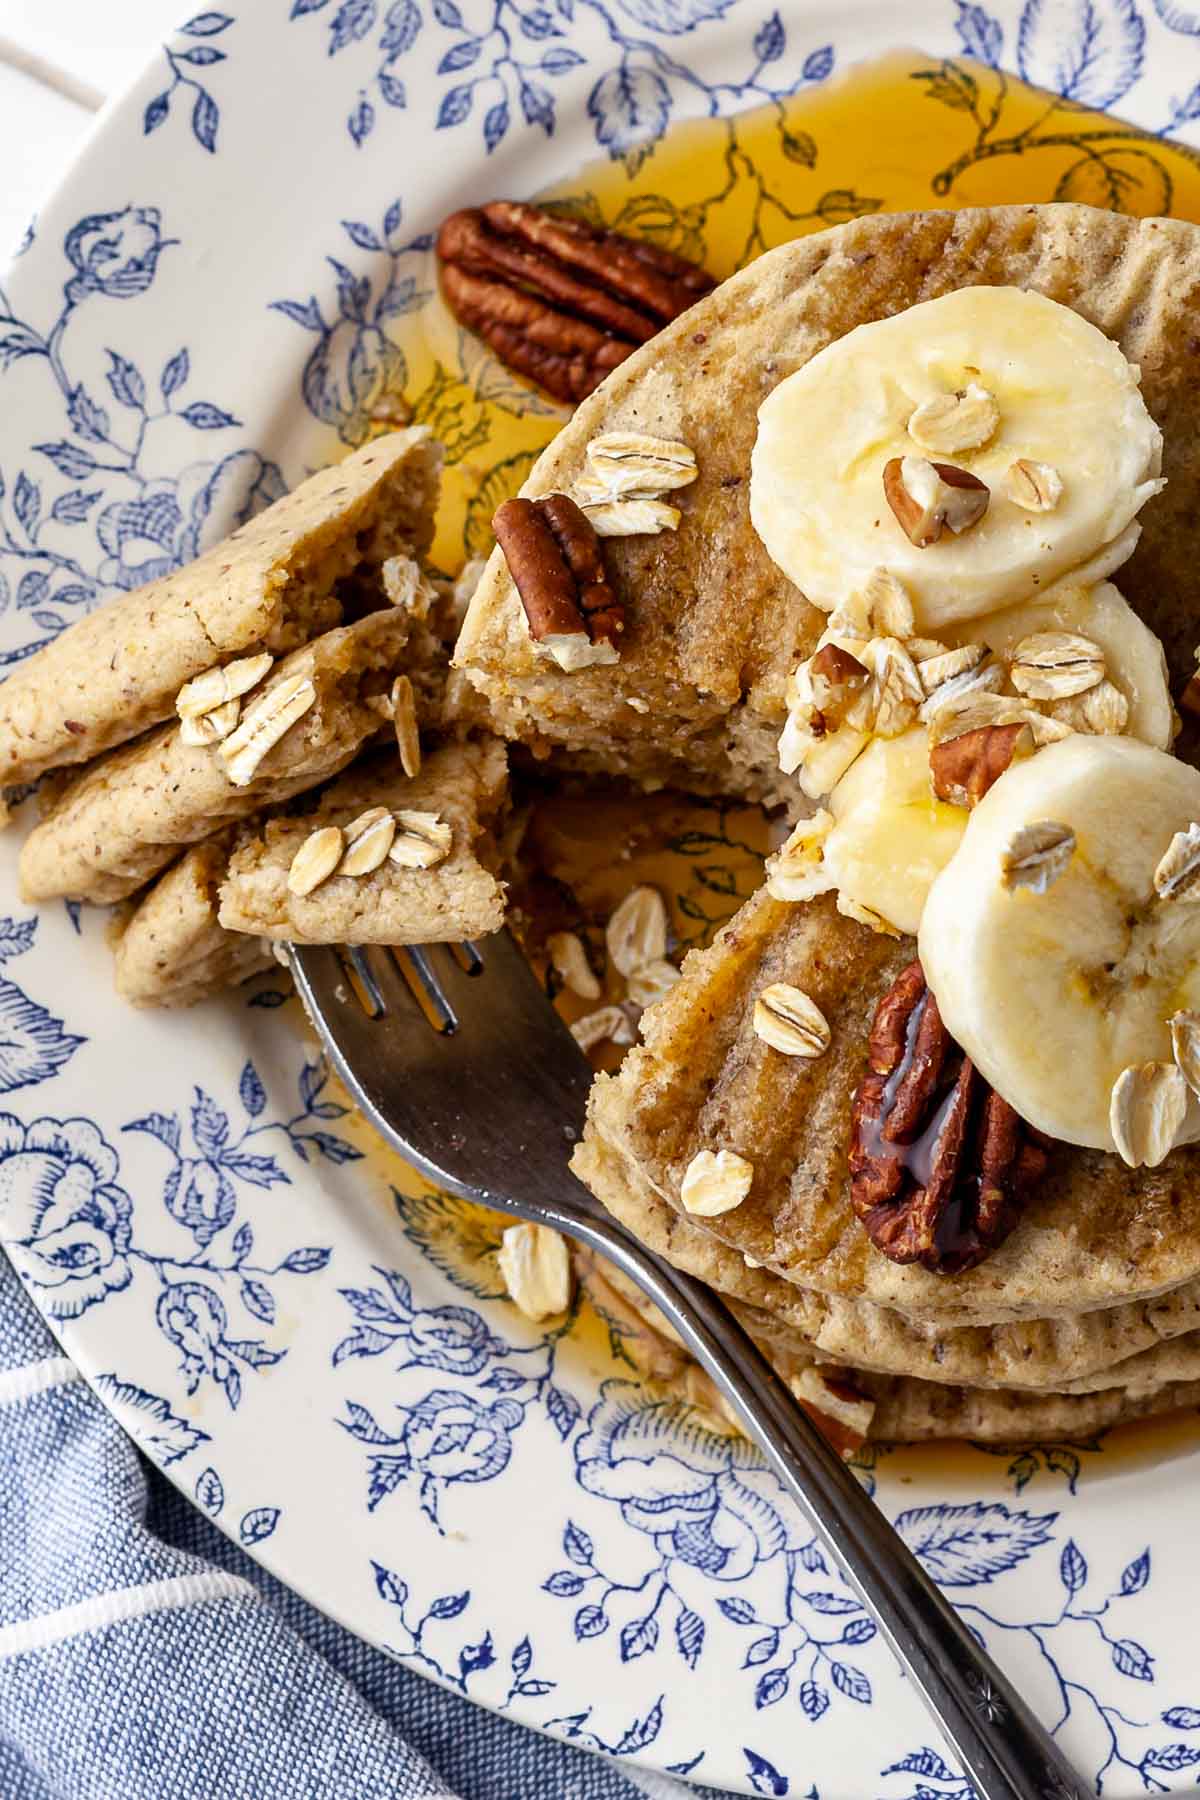 Overhead view of a stack of vegan oat flour pancakes topped with banana slices, toasted oats, and chopped pecans, drizzled with pure maple syrup. To the left, there is a fork holding three pieces of pancakes. The meal is served on a blue and white floral plate.